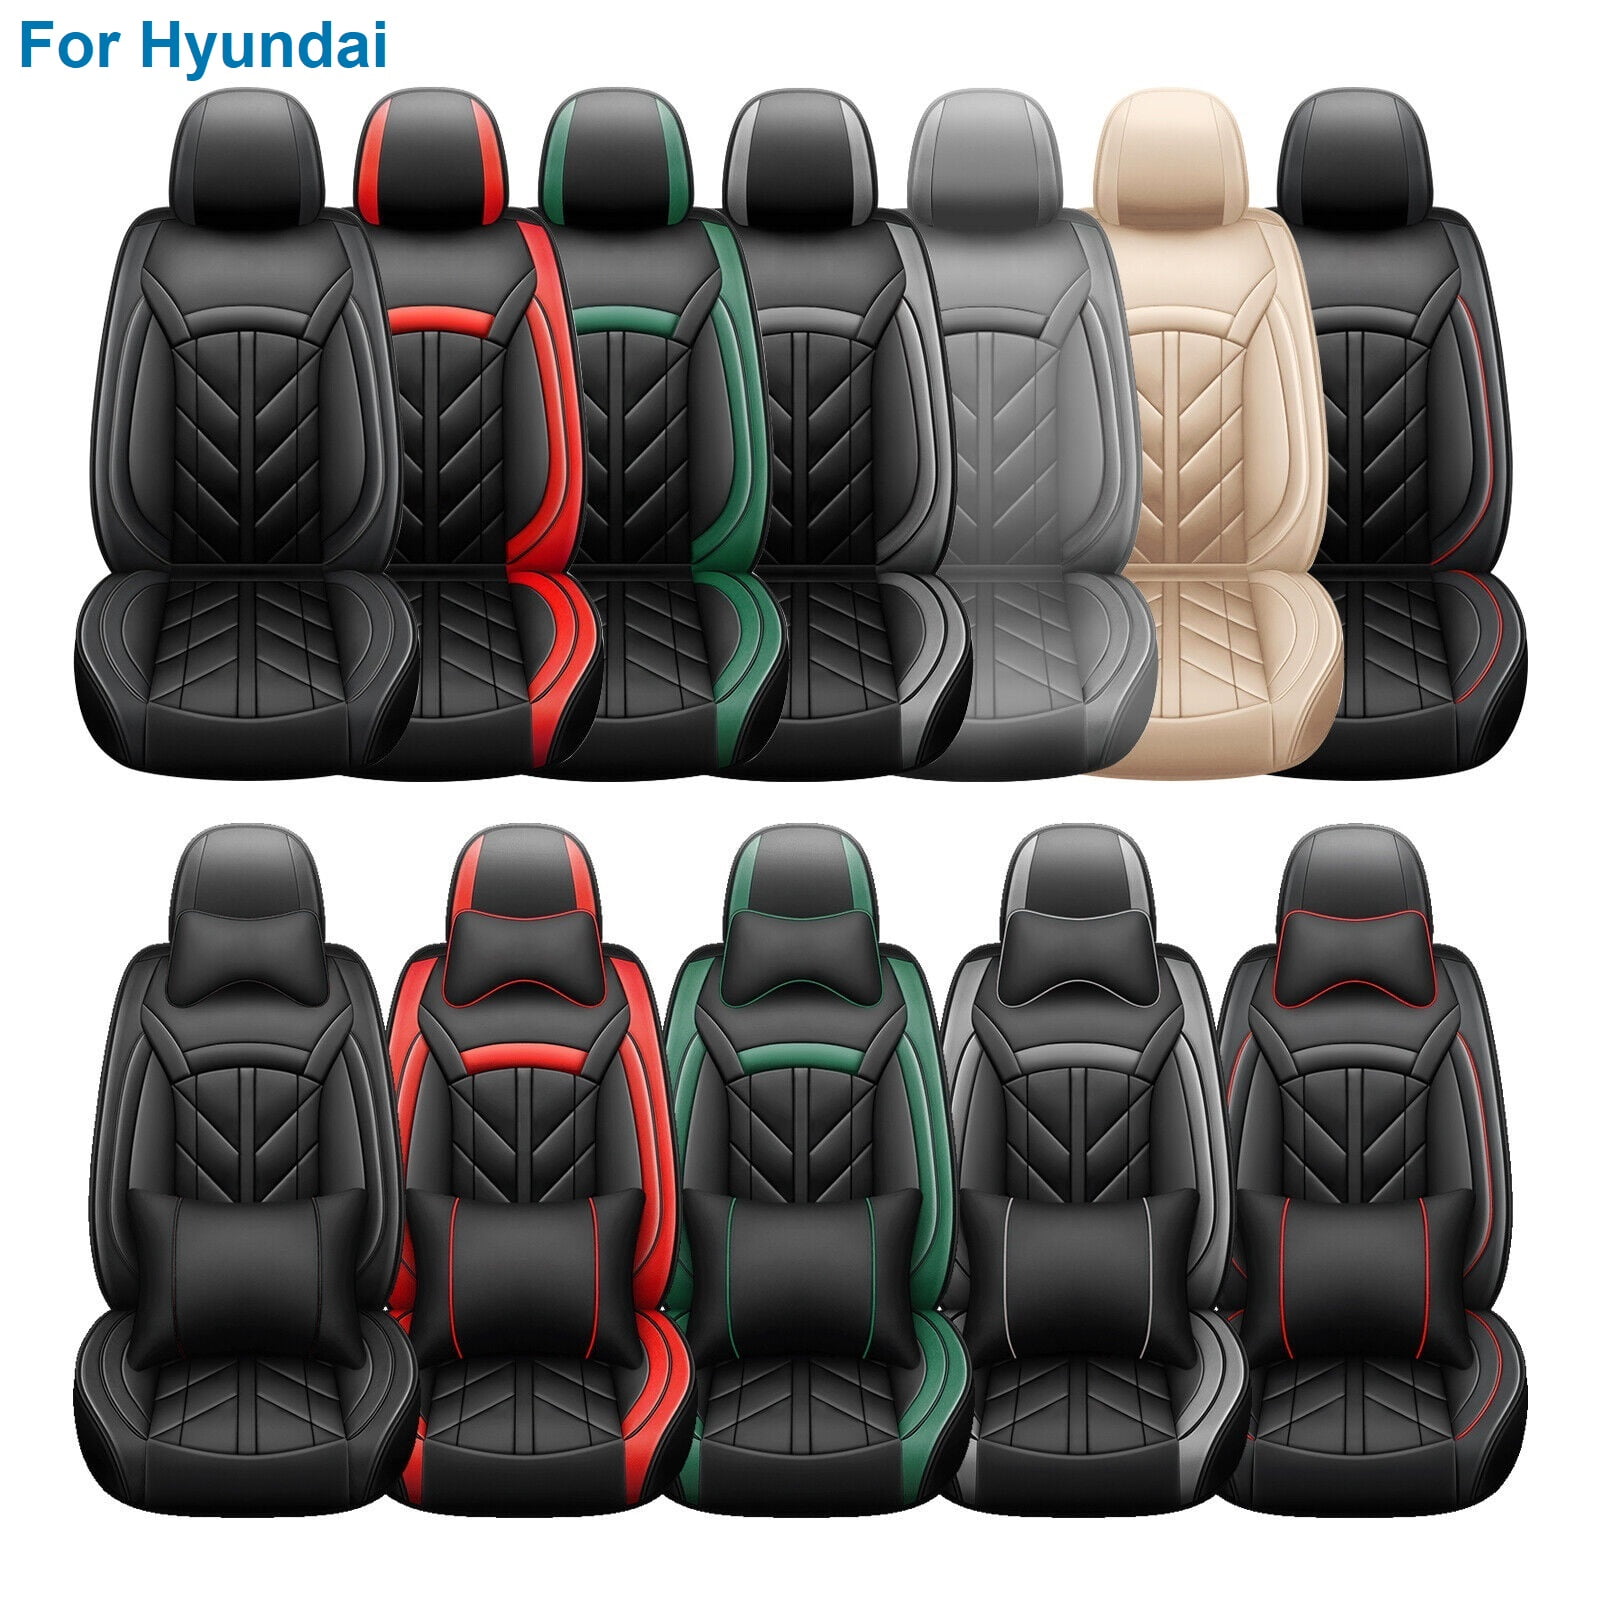 For Hyundai Car Seat Covers, Wear-resistant 5 Seats Auto Cushion